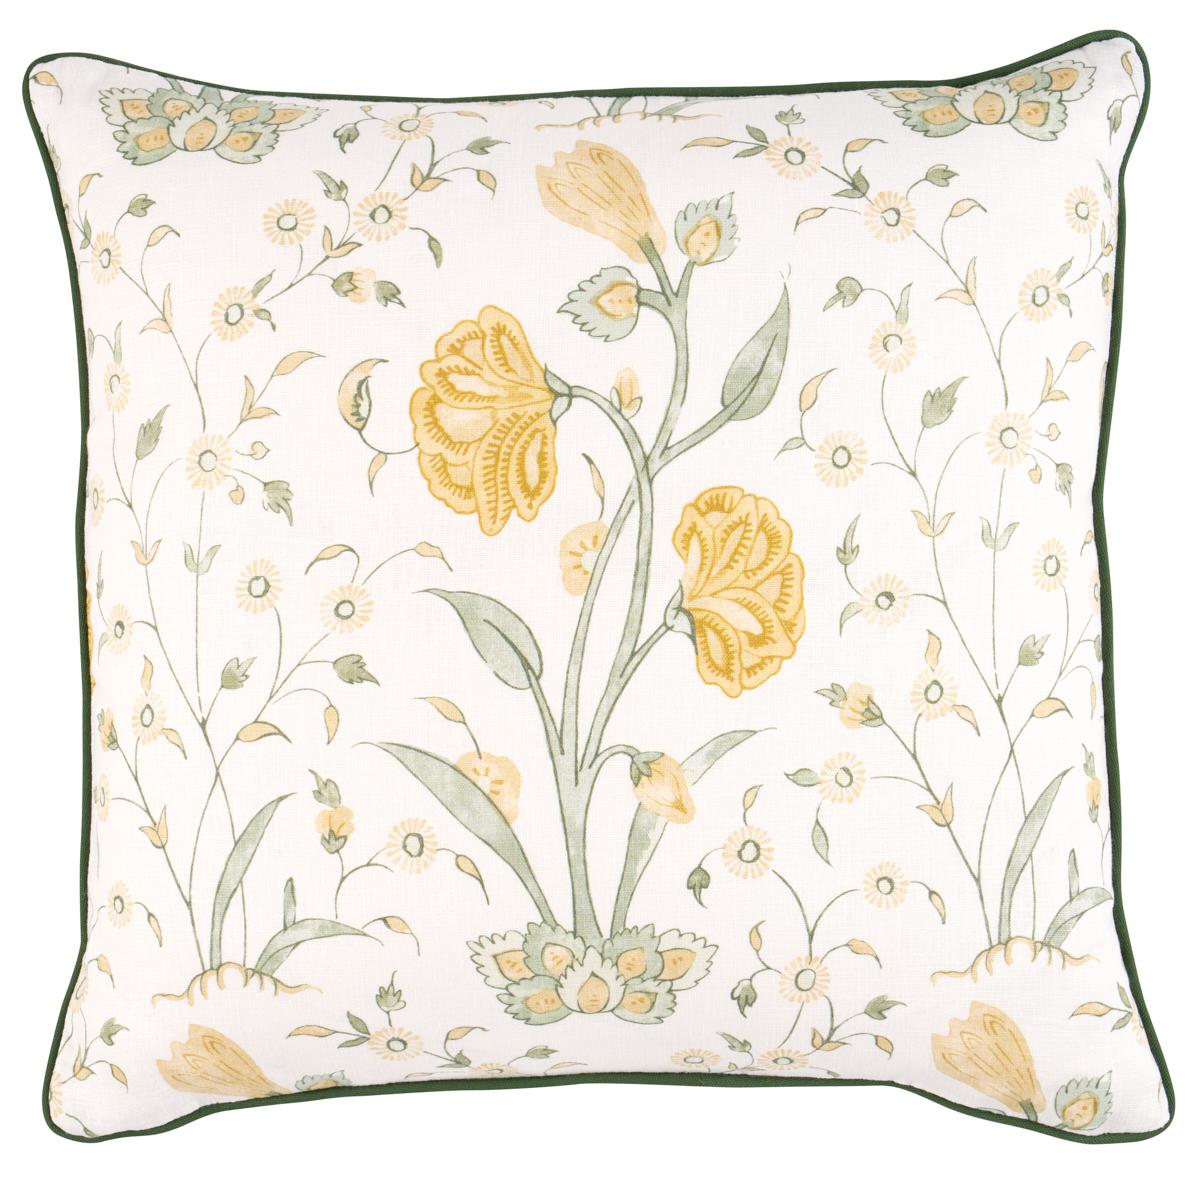 Khilana Floral Pillow in Marigold 20 x 20" For Sale